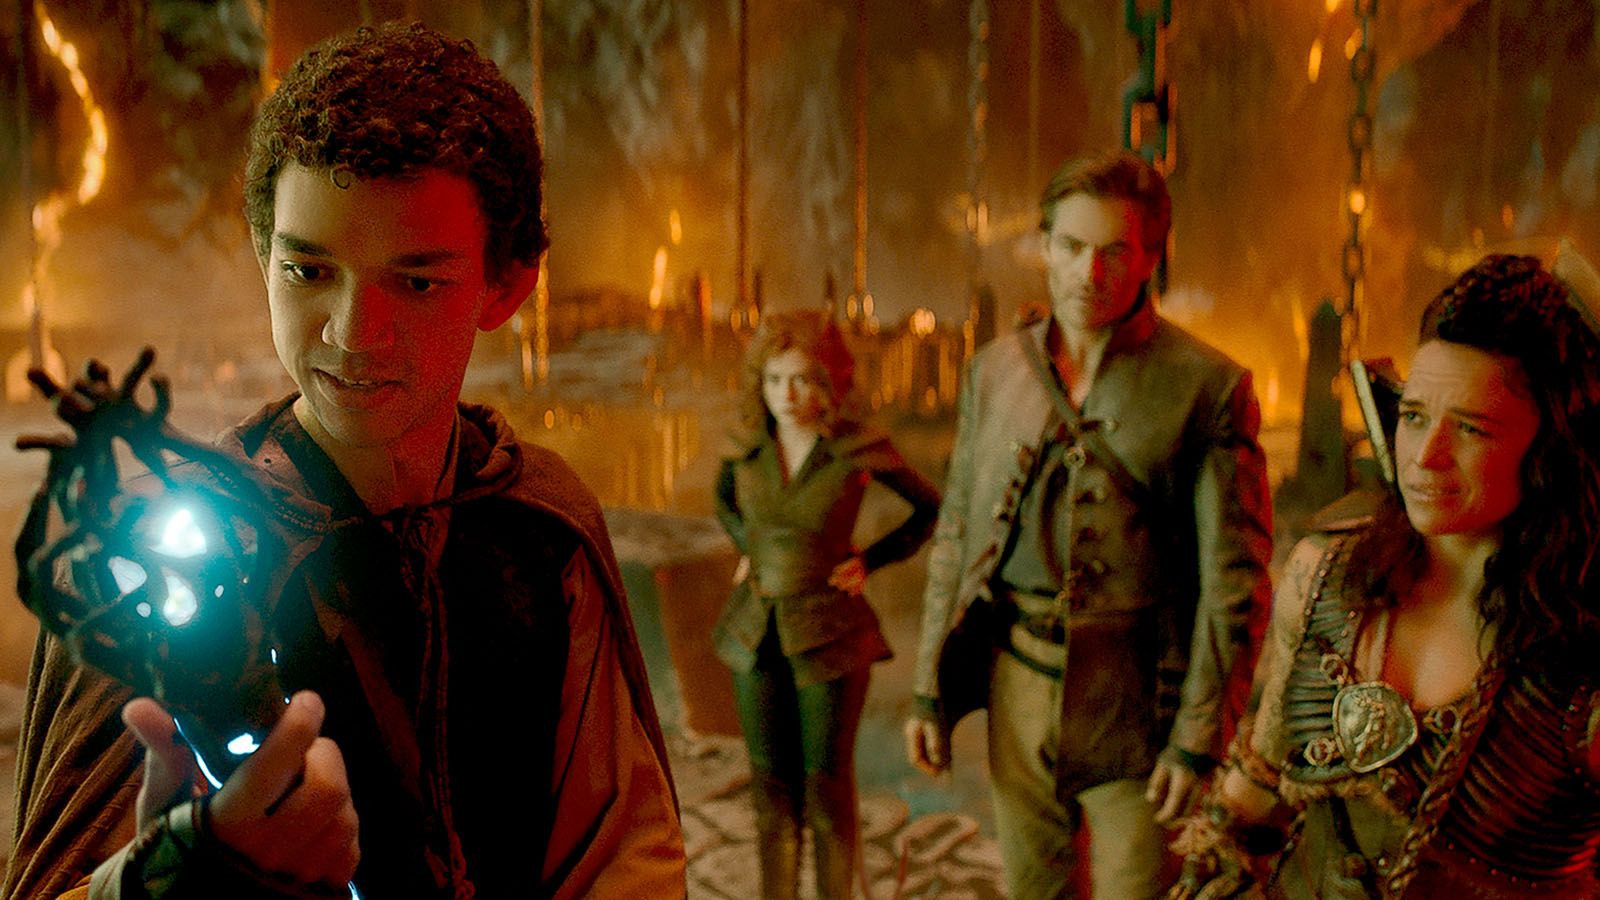 Dungeons & Dragons: Honor Among Thieves, starring, from left, Justice Smith, Sophia Lillis, Chris Pine, and Michelle Rodriguez, opened at No. 1 at the U.S. Box Office.